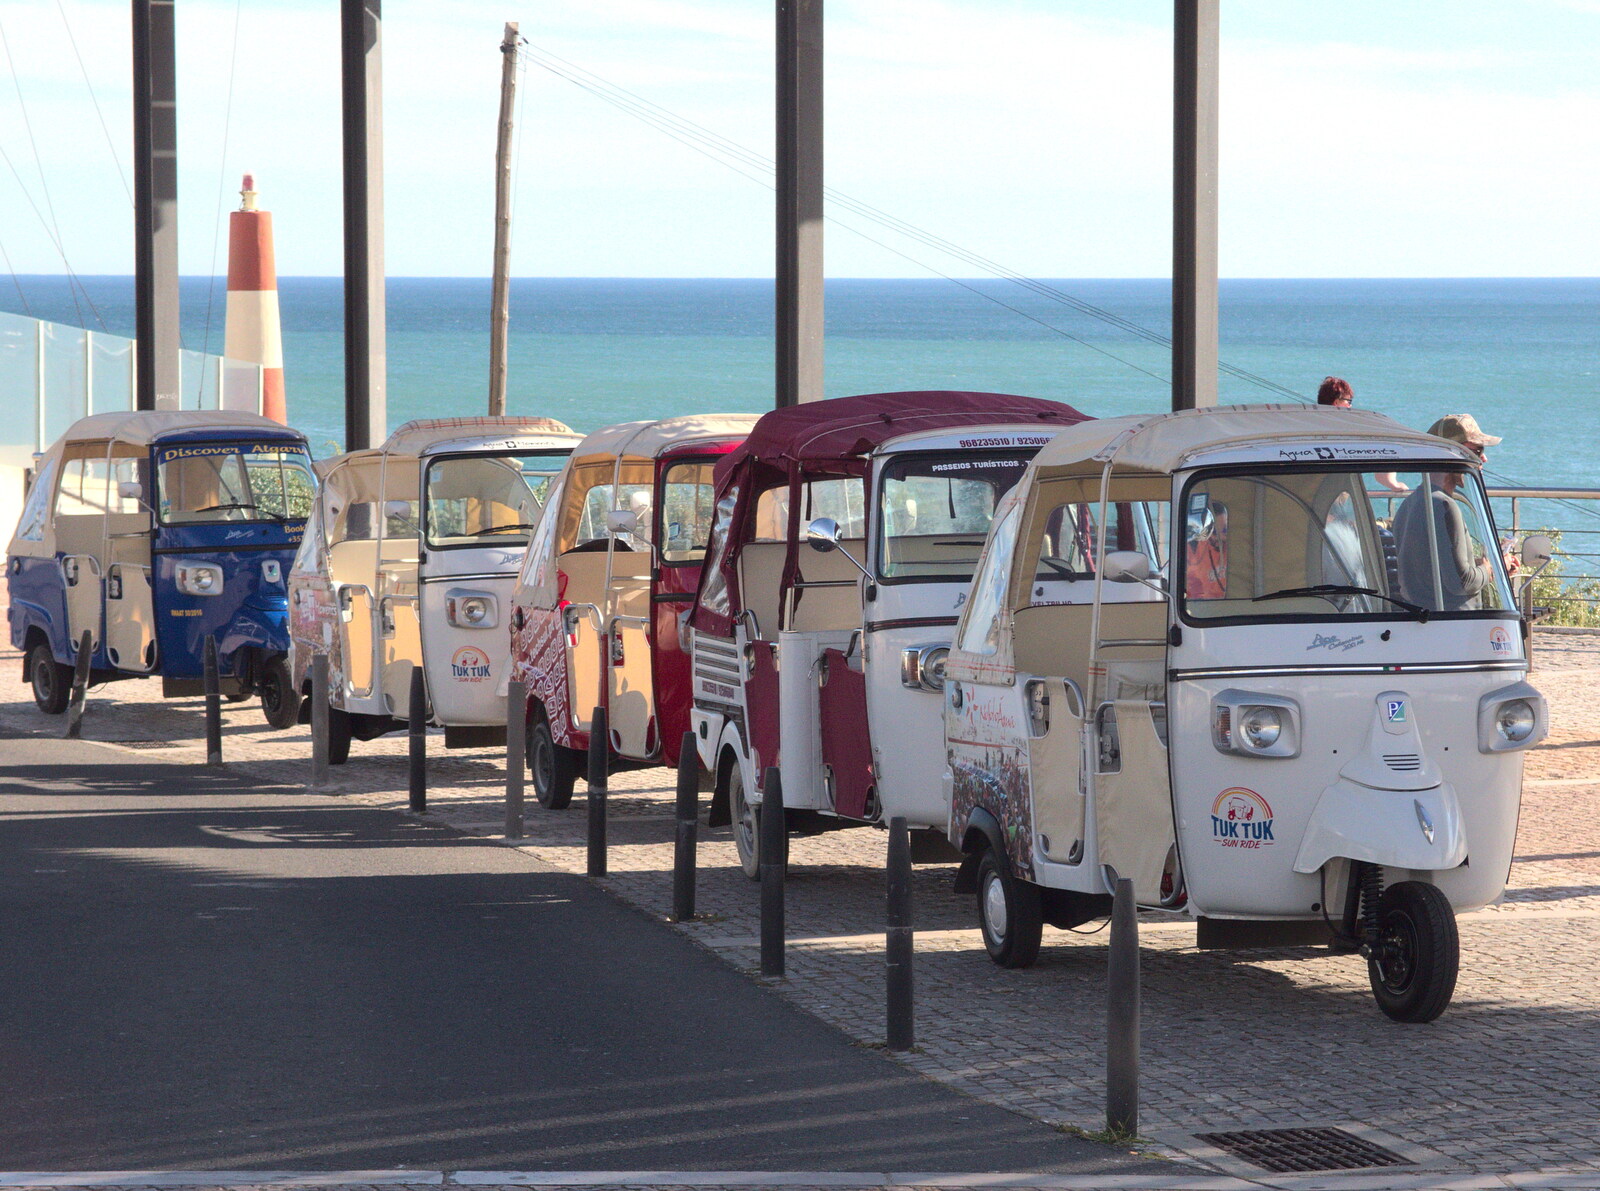 A line of tuk-tuks near the Inatel Hotel from Last Days and the Journey Home, Albufeira, Portugal - 9th April 2016